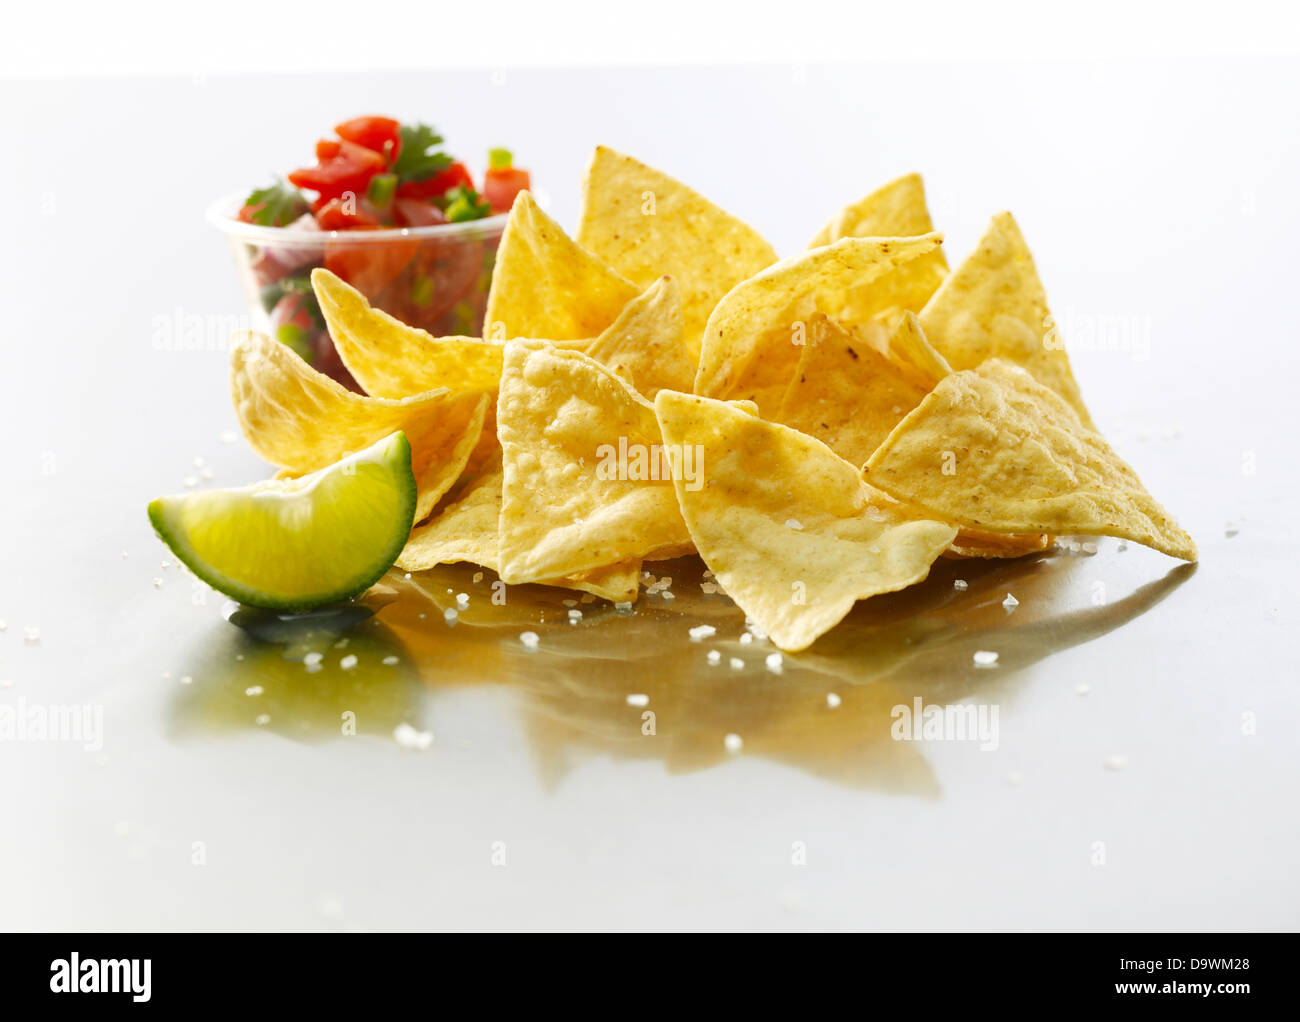 chips and salsa Stock Photo